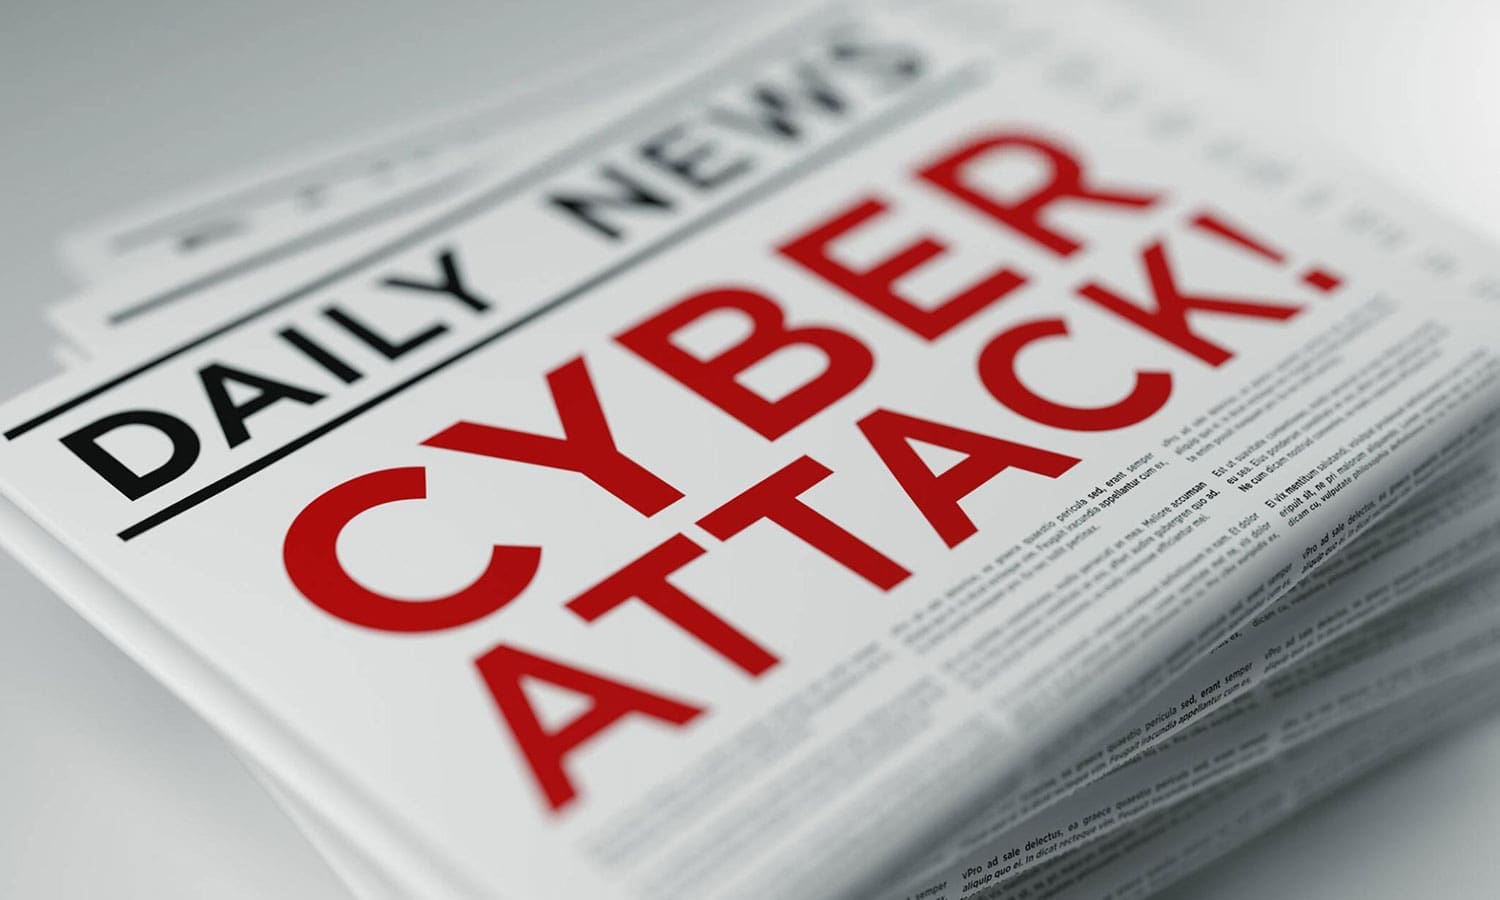 Don't Be a Headline: Protect Yourself from the Scariest Cyber Threats